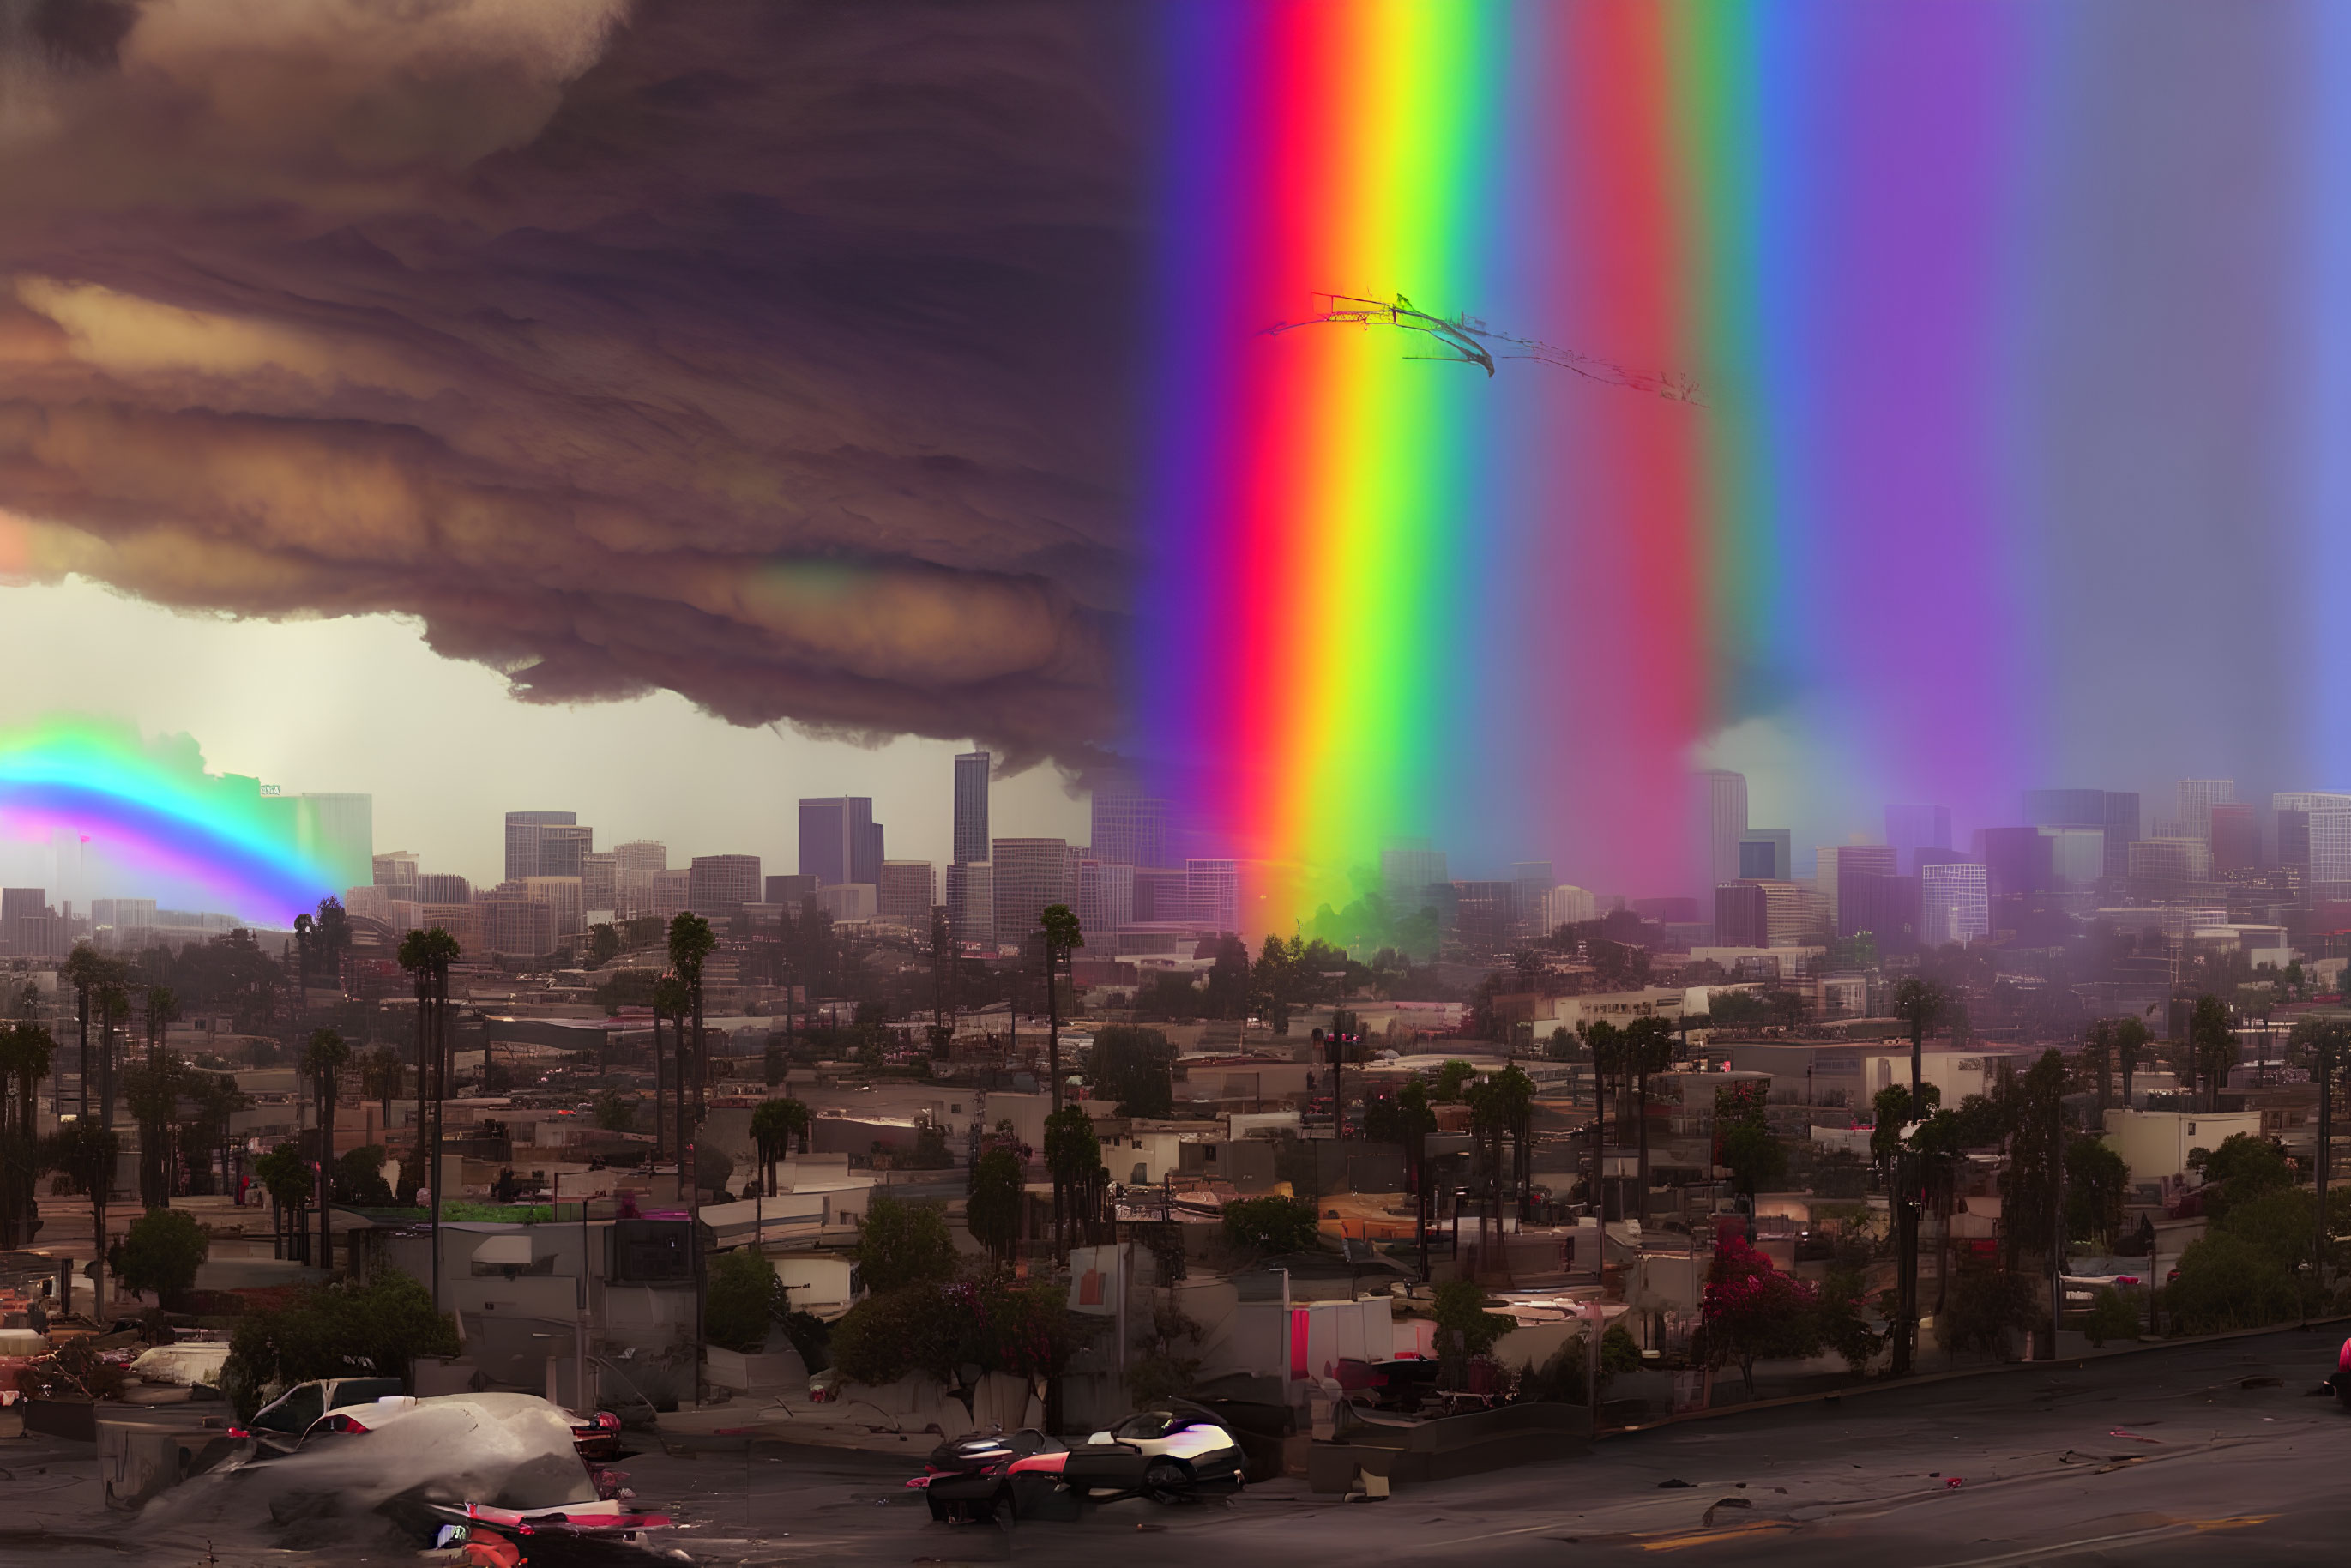 City skyline engulfed in brown cloud with vibrant rainbows amidst chaos